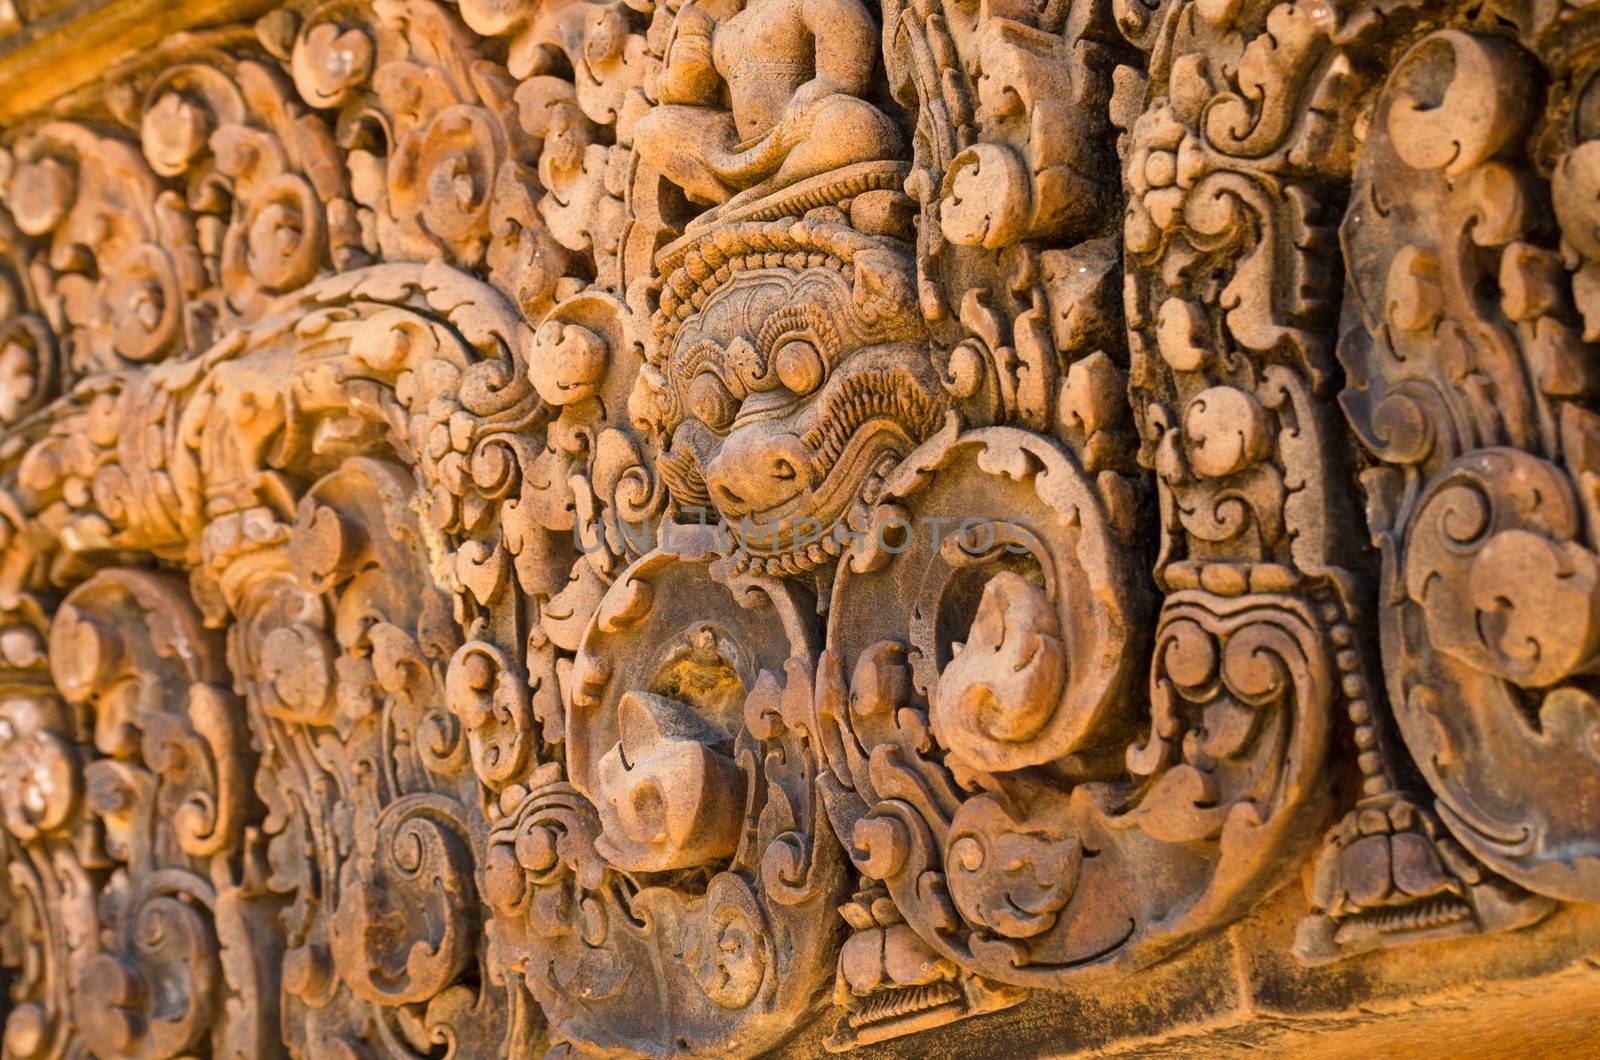 Carving details at Banteay Srei temple, Siem Reap, Cambodia